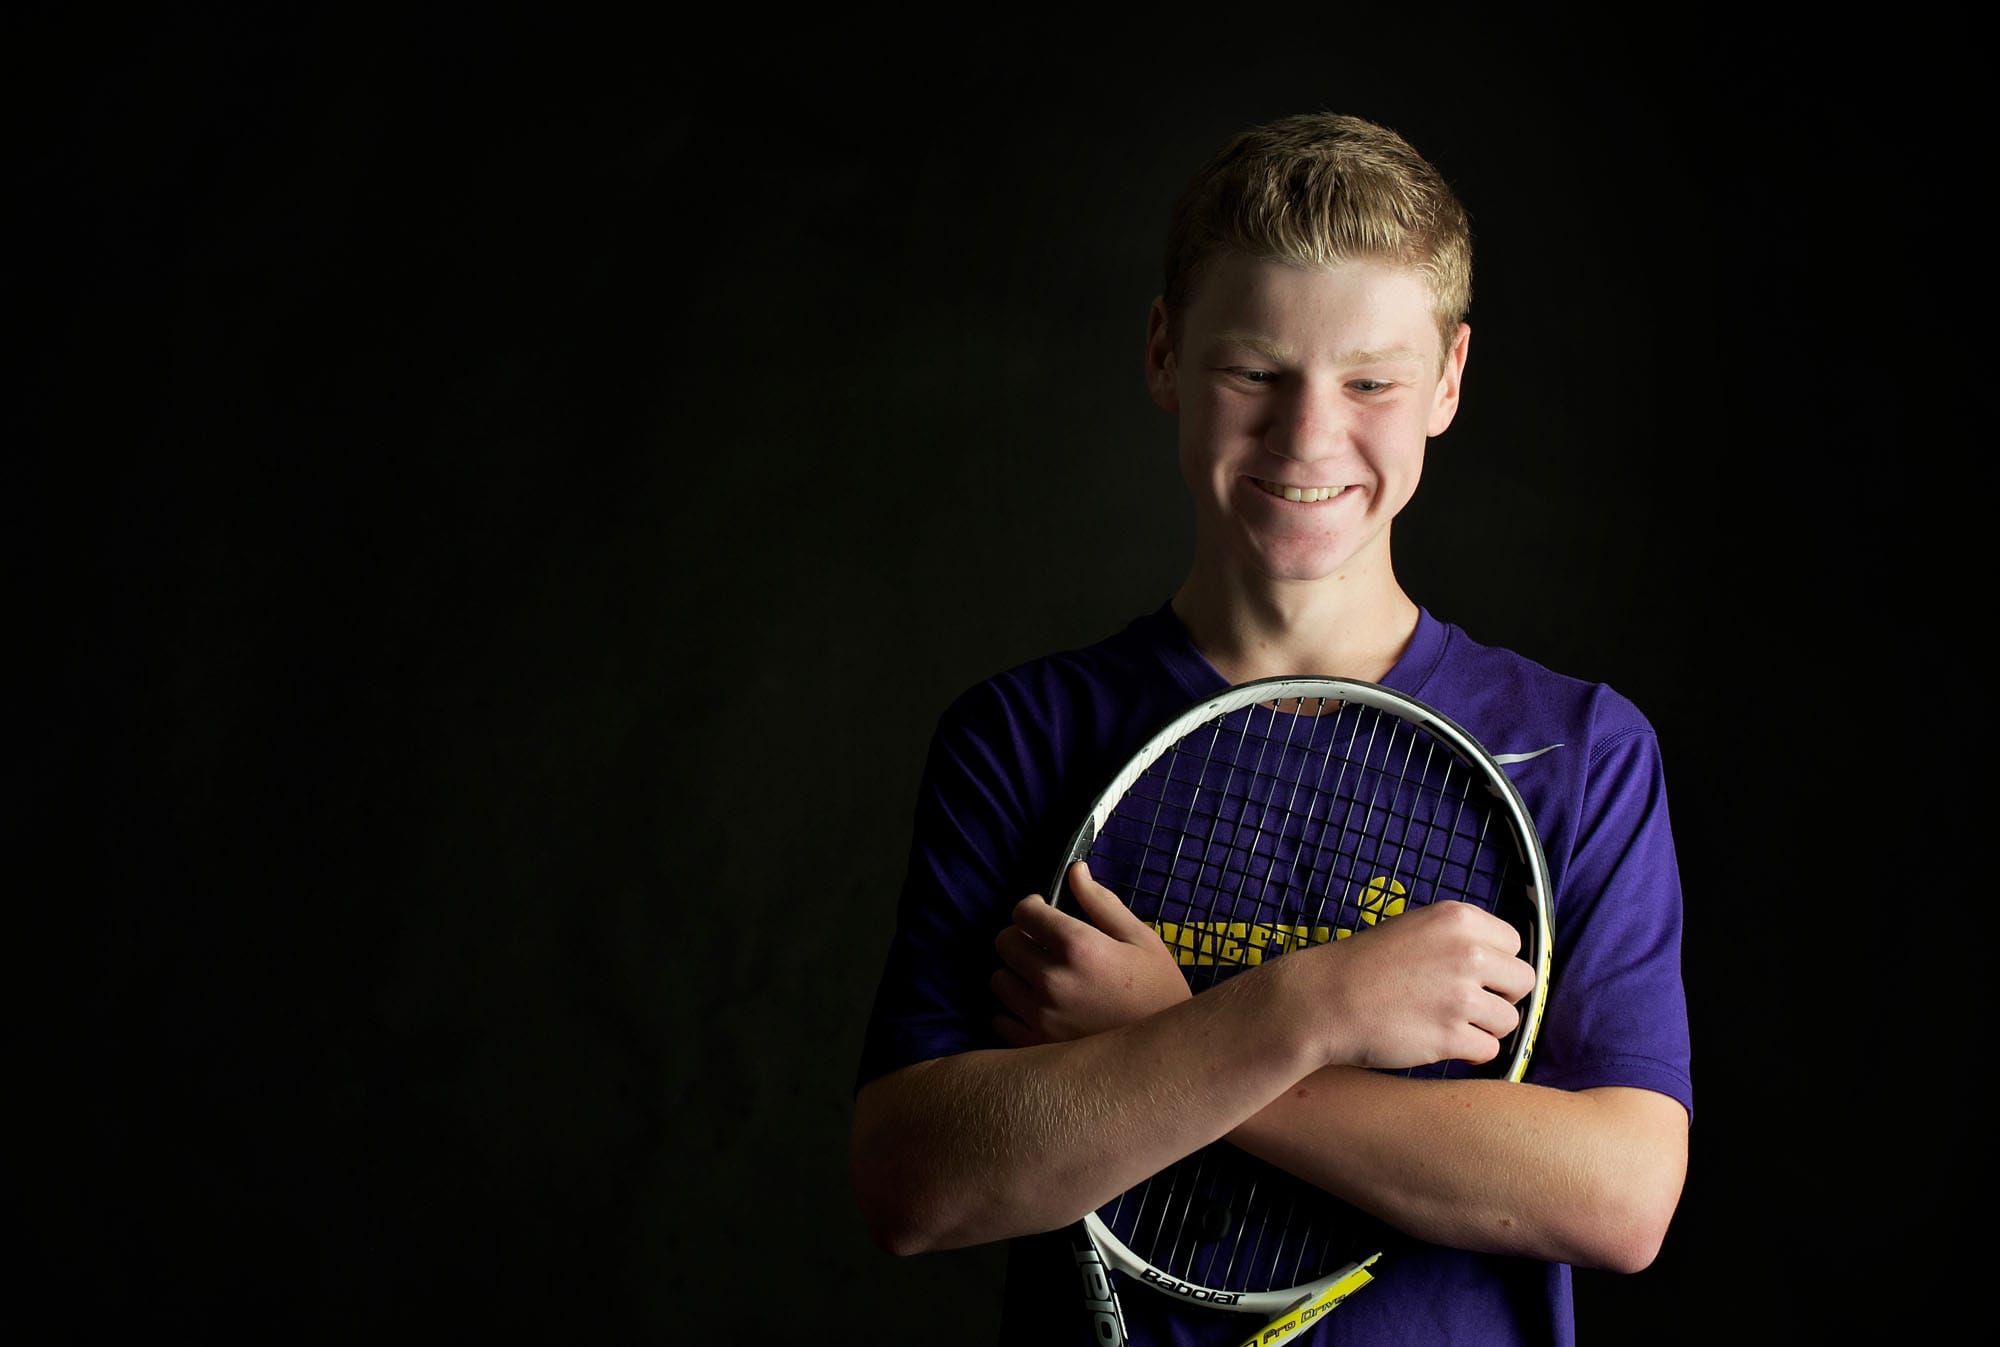 Columbia River's Dominik Goercki went undefeated against Clark County competition and placed eighth at the Class 3A state tournament.